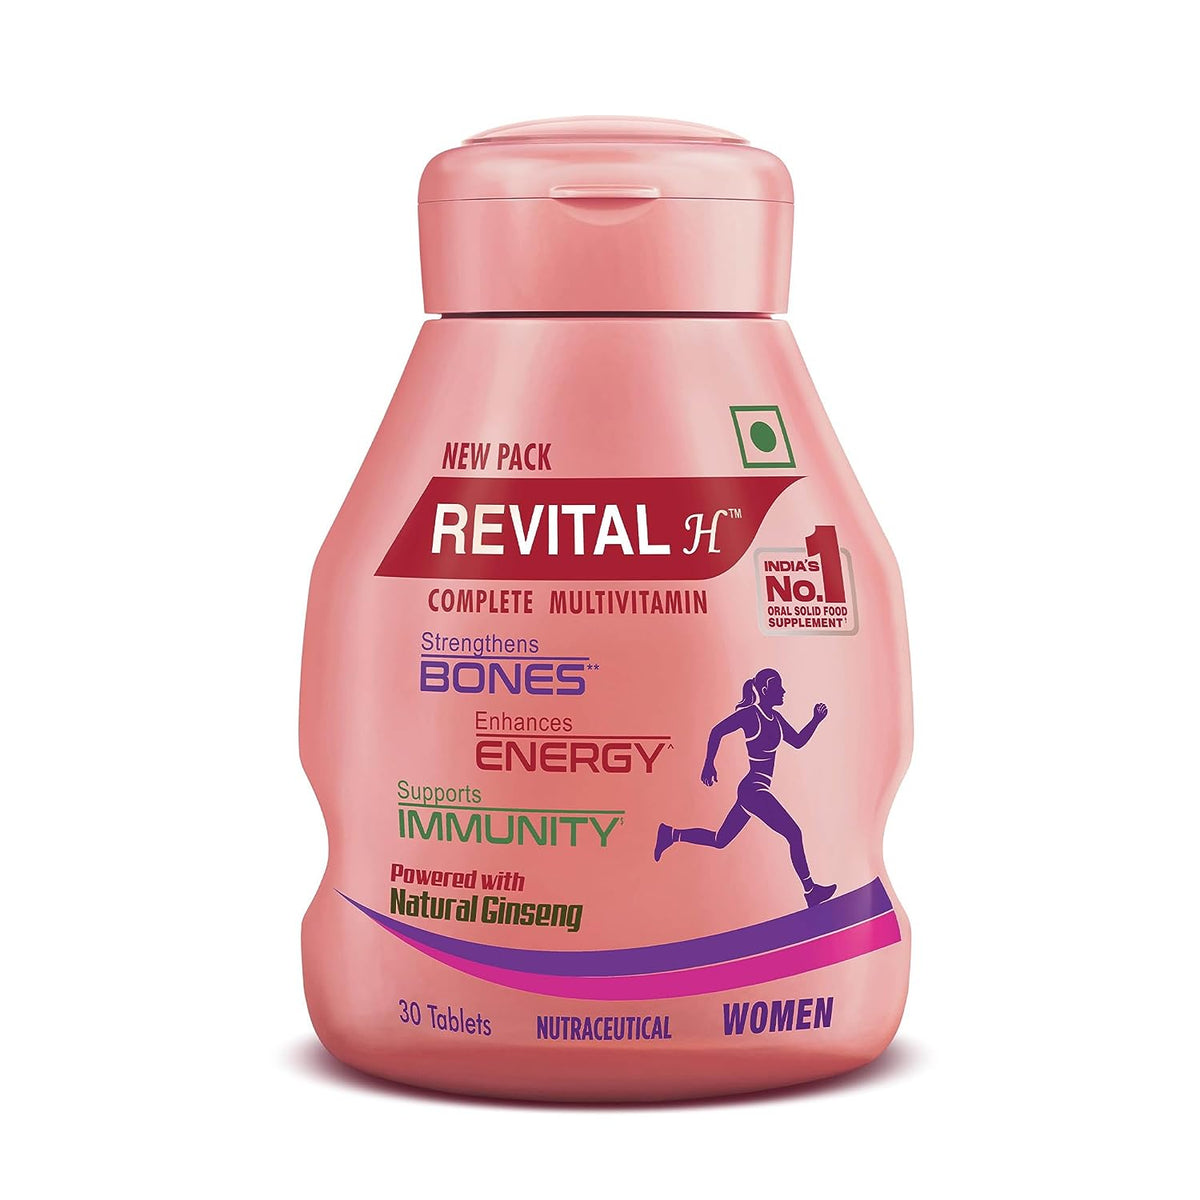 Revital H For Woman with Multivitamins,Calcium,Zinc & Natural Ginseng 30 Capsules